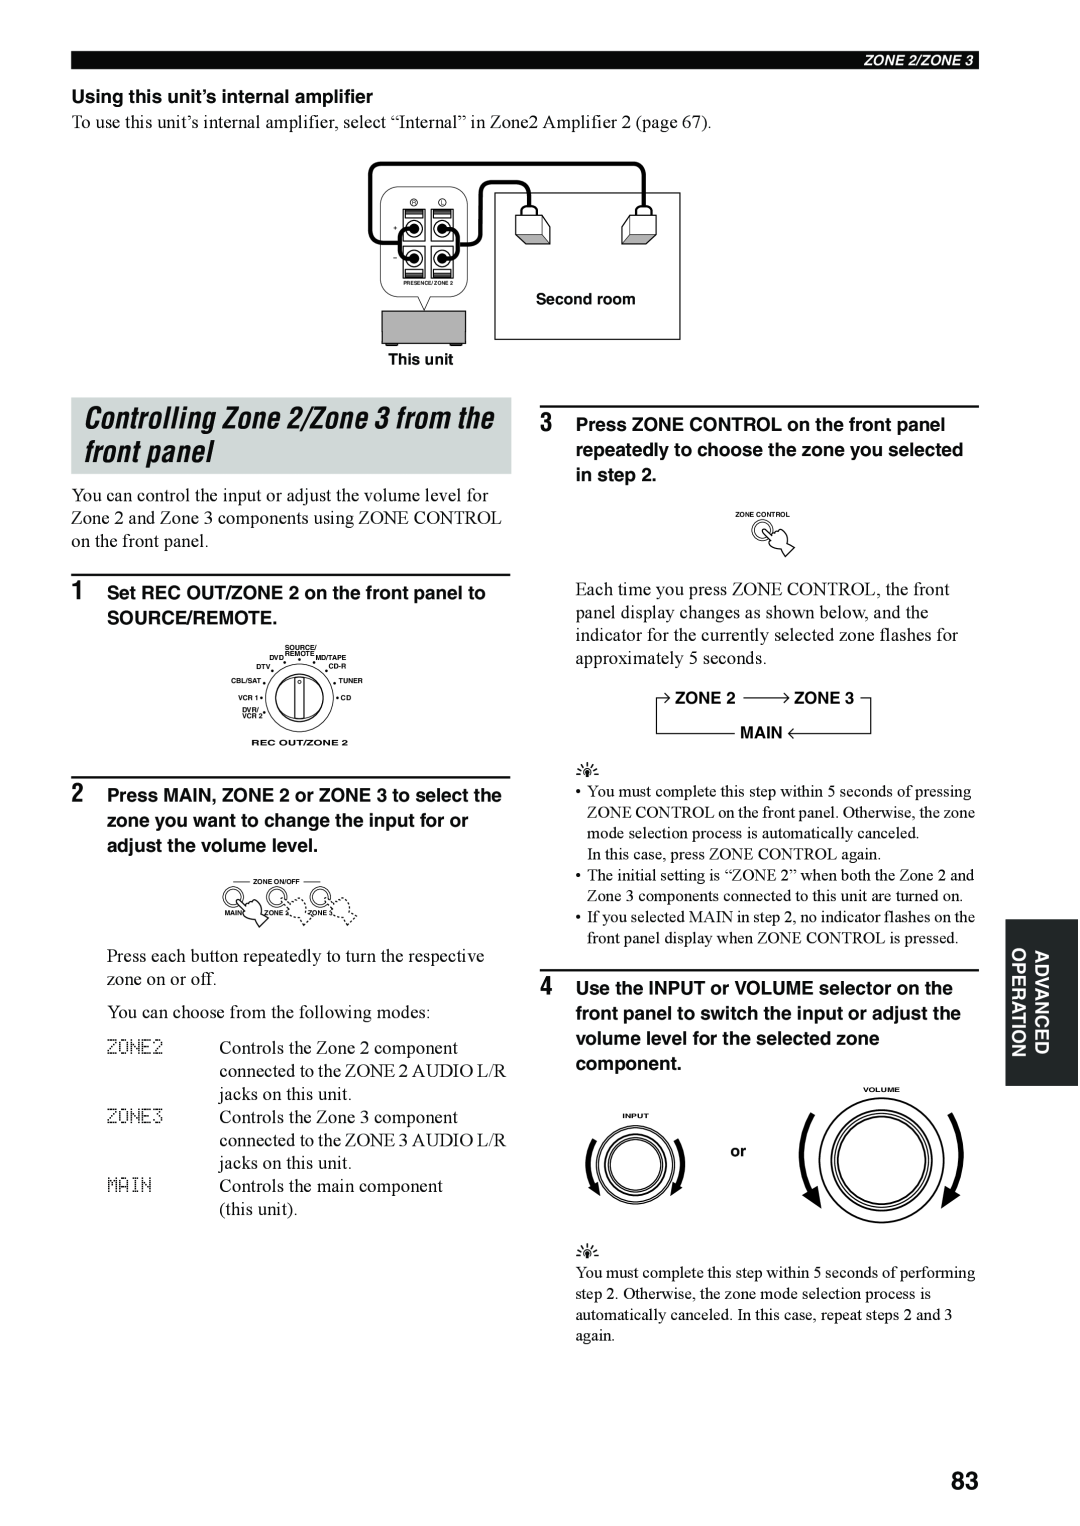 Yamaha RX-V4600 owner manual Controlling Zone 2/Zone 3 from the front panel, Using this unit’s internal amplifier 